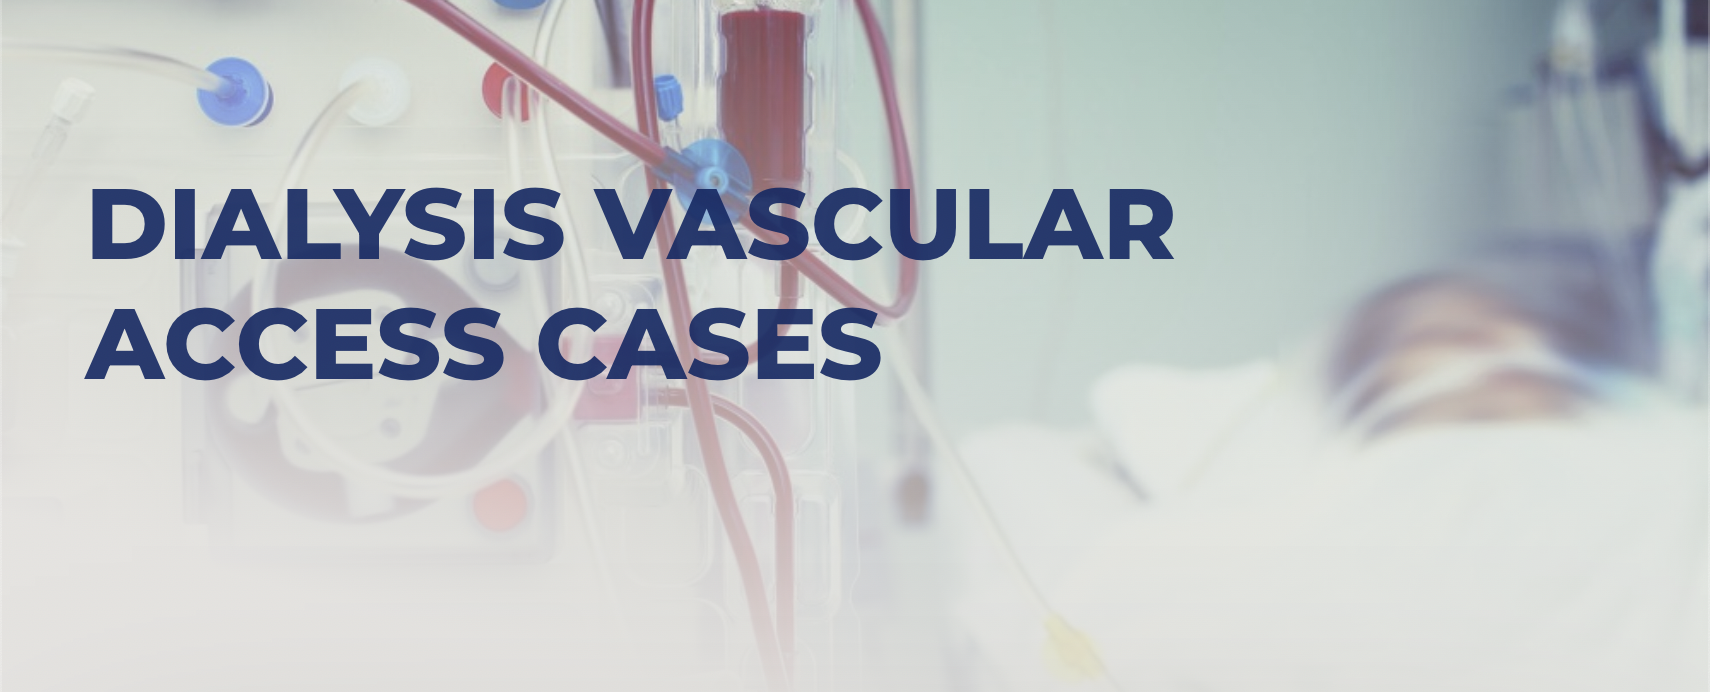 Dialysis Catheters 365 days a year: Patient Cases - Vascular Access for Dialysis